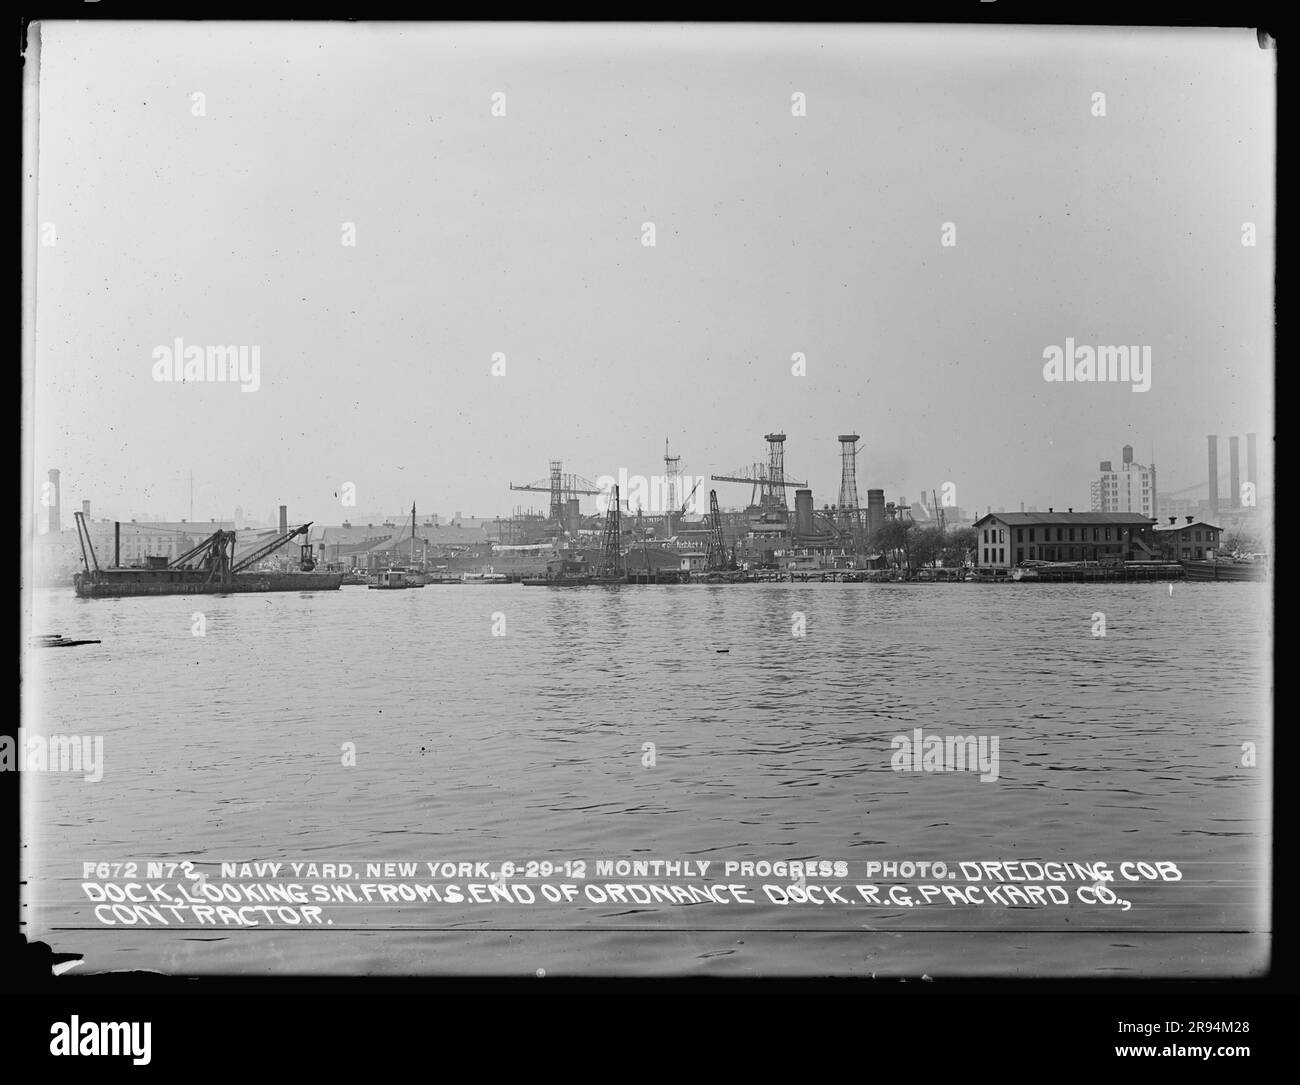 Monthly Progress Photo, Dredging Cob Dock, Looking Southwest from South End of Ordnance Dock, R. G. Packard Company, Contractor. Glass Plate Negatives of the Construction and Repair of Buildings, Facilities, and Vessels at the New York Navy Yard. Stock Photo